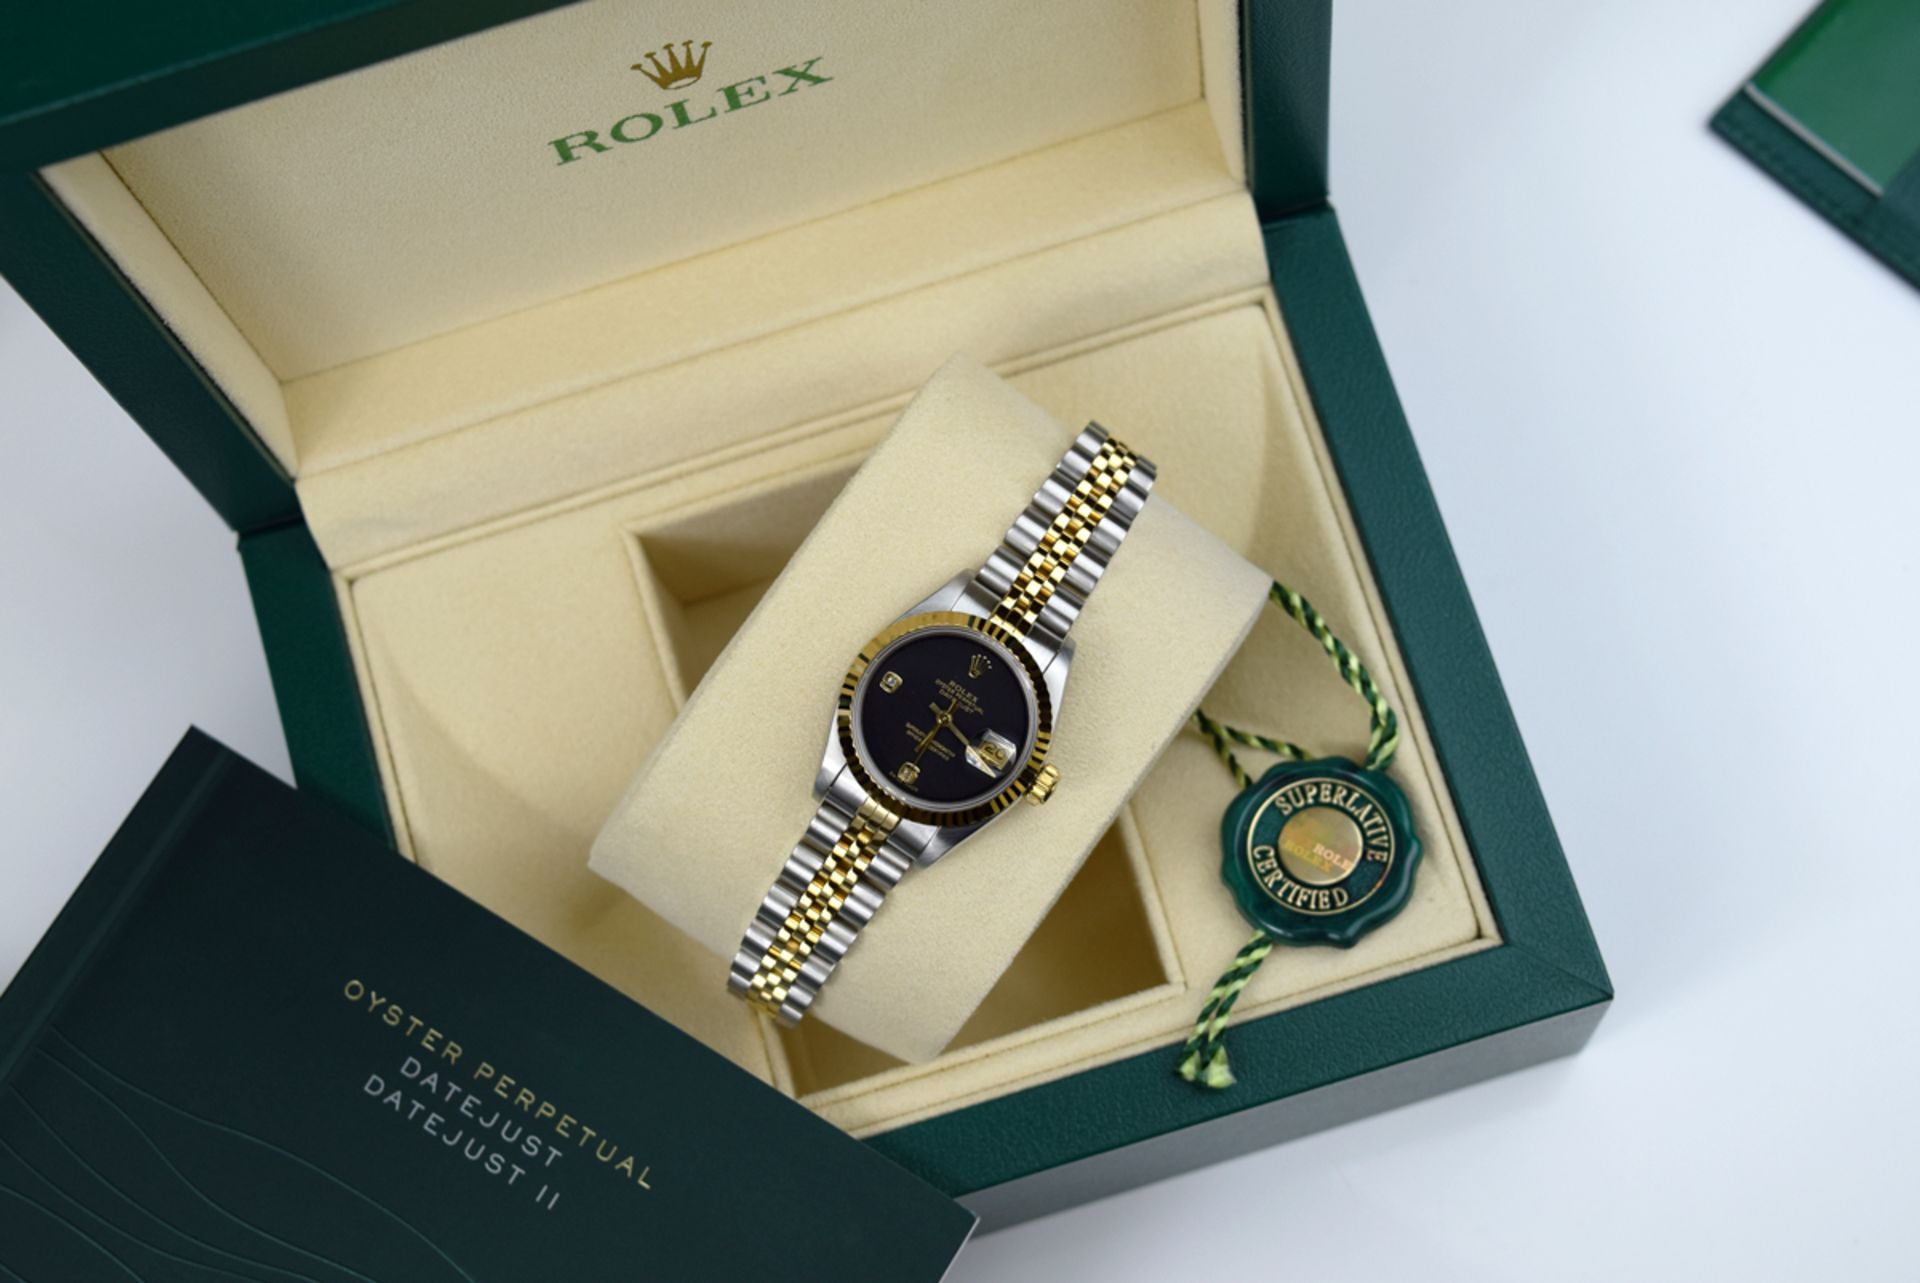 ROLEX 'LADY DATEJUST' 26MM - STEEL & 18K GOLD WITH ✦ RARE DIAMOND DIAL - Image 4 of 10